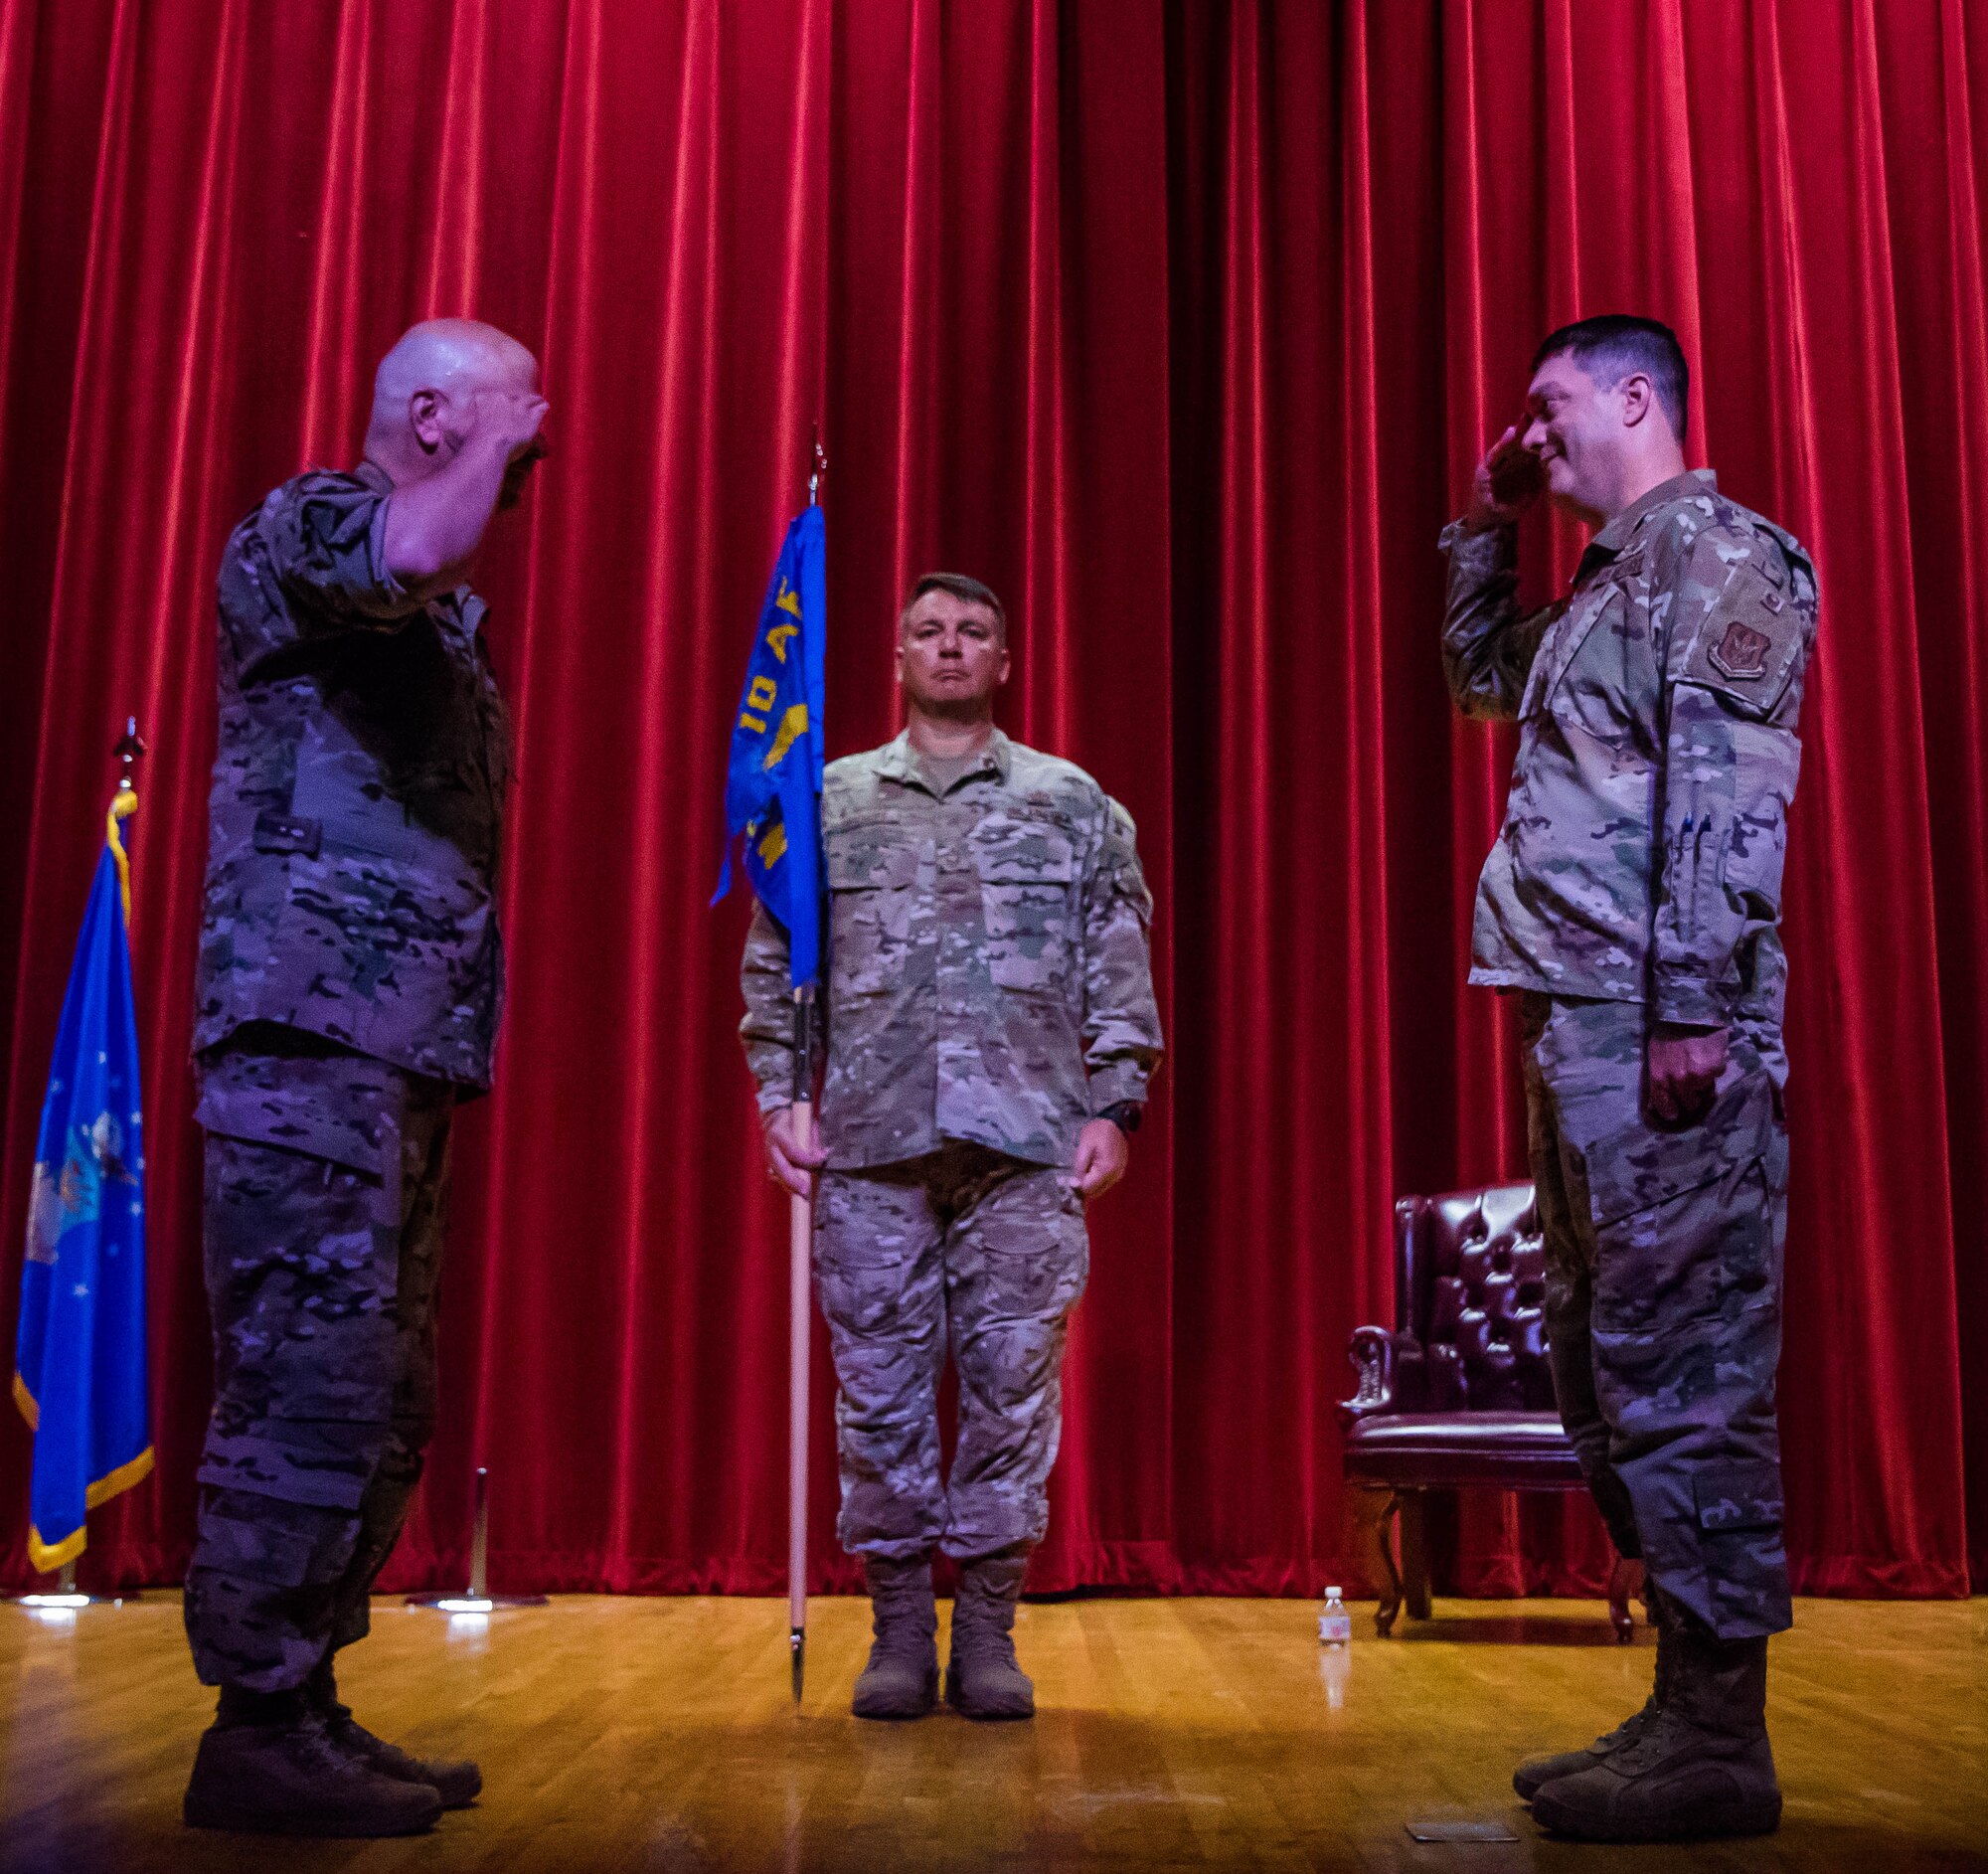 Maj. Gen. Brian Borgen, 10th Air Force commander, presides over a ceremony where Col. Lori Jones relinquishes command of the 960th Cyberspace Wing to Col. Richard Erredge Aug. 9, 2020, at Joint Base San Antonio-Lackland, Texas. (U.S. Air Force photo by Tech. Sgt. Christopher Brzuchalski)